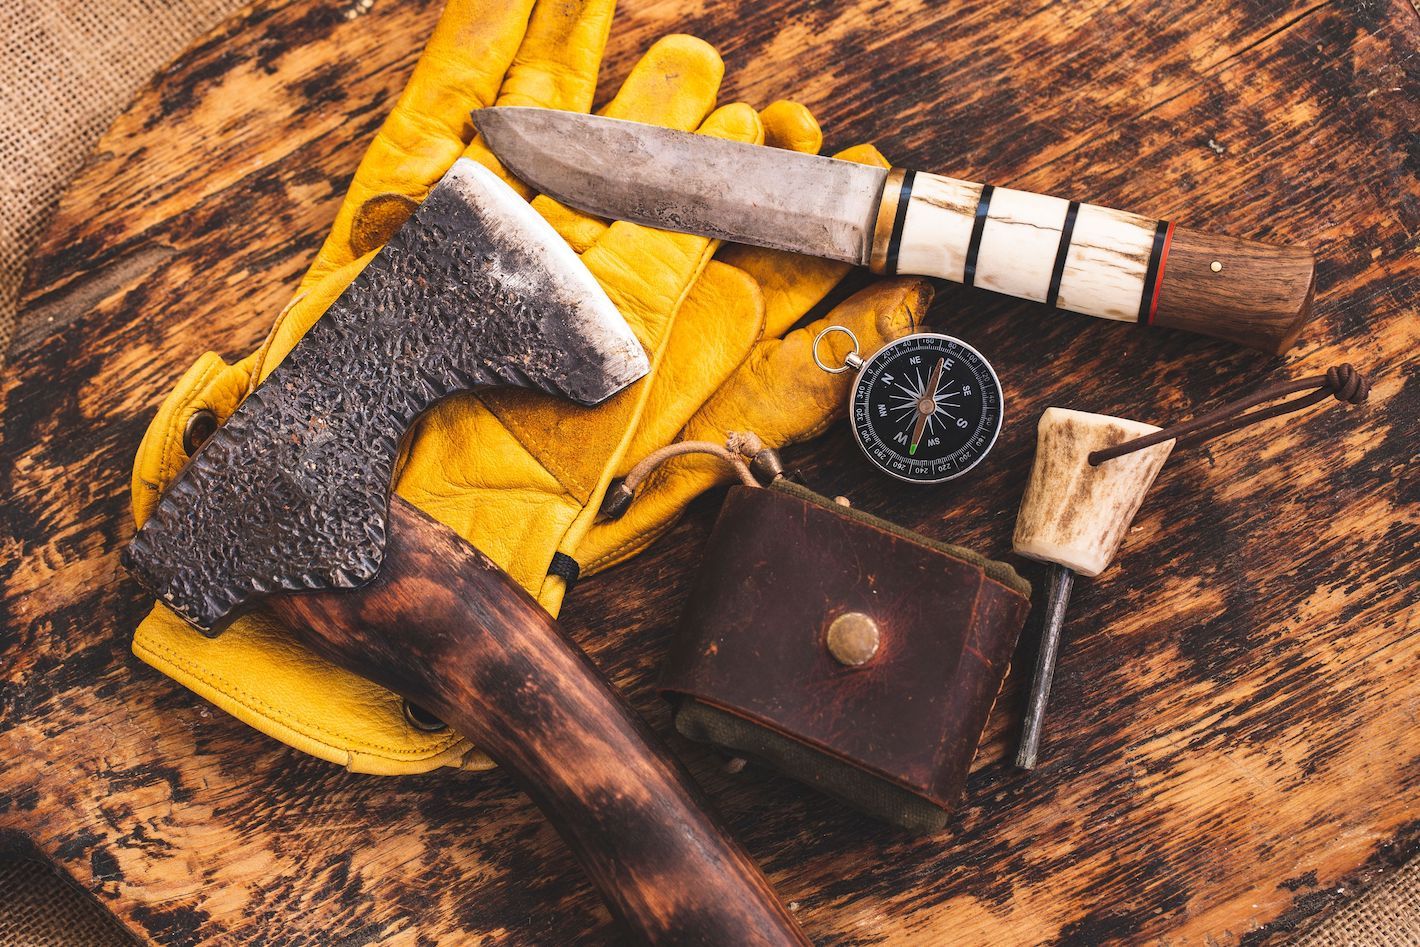 Bushcraft tools including an axe, a knife, a whetstone, a compass and a ferro rod.